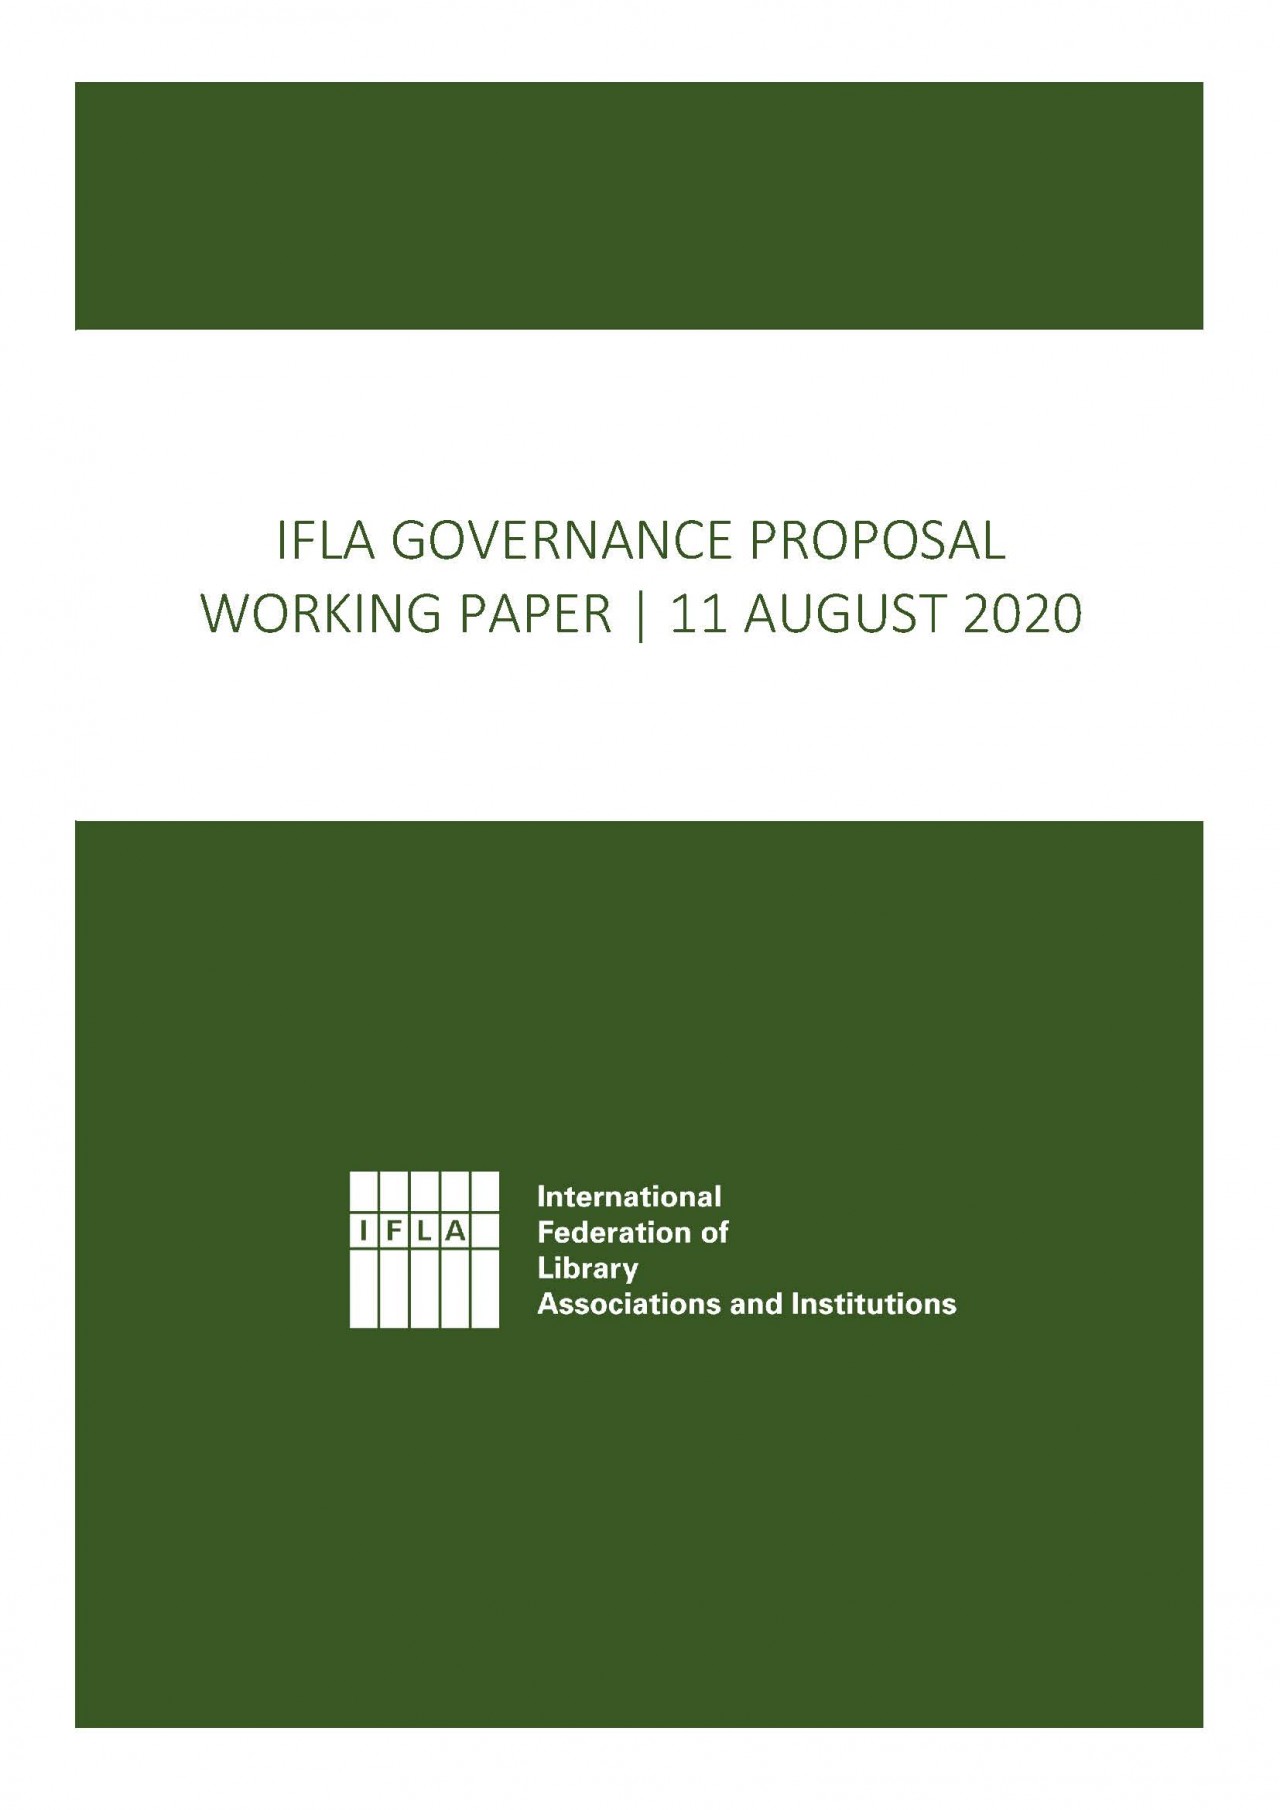 IFLA Governance Review Working Paper